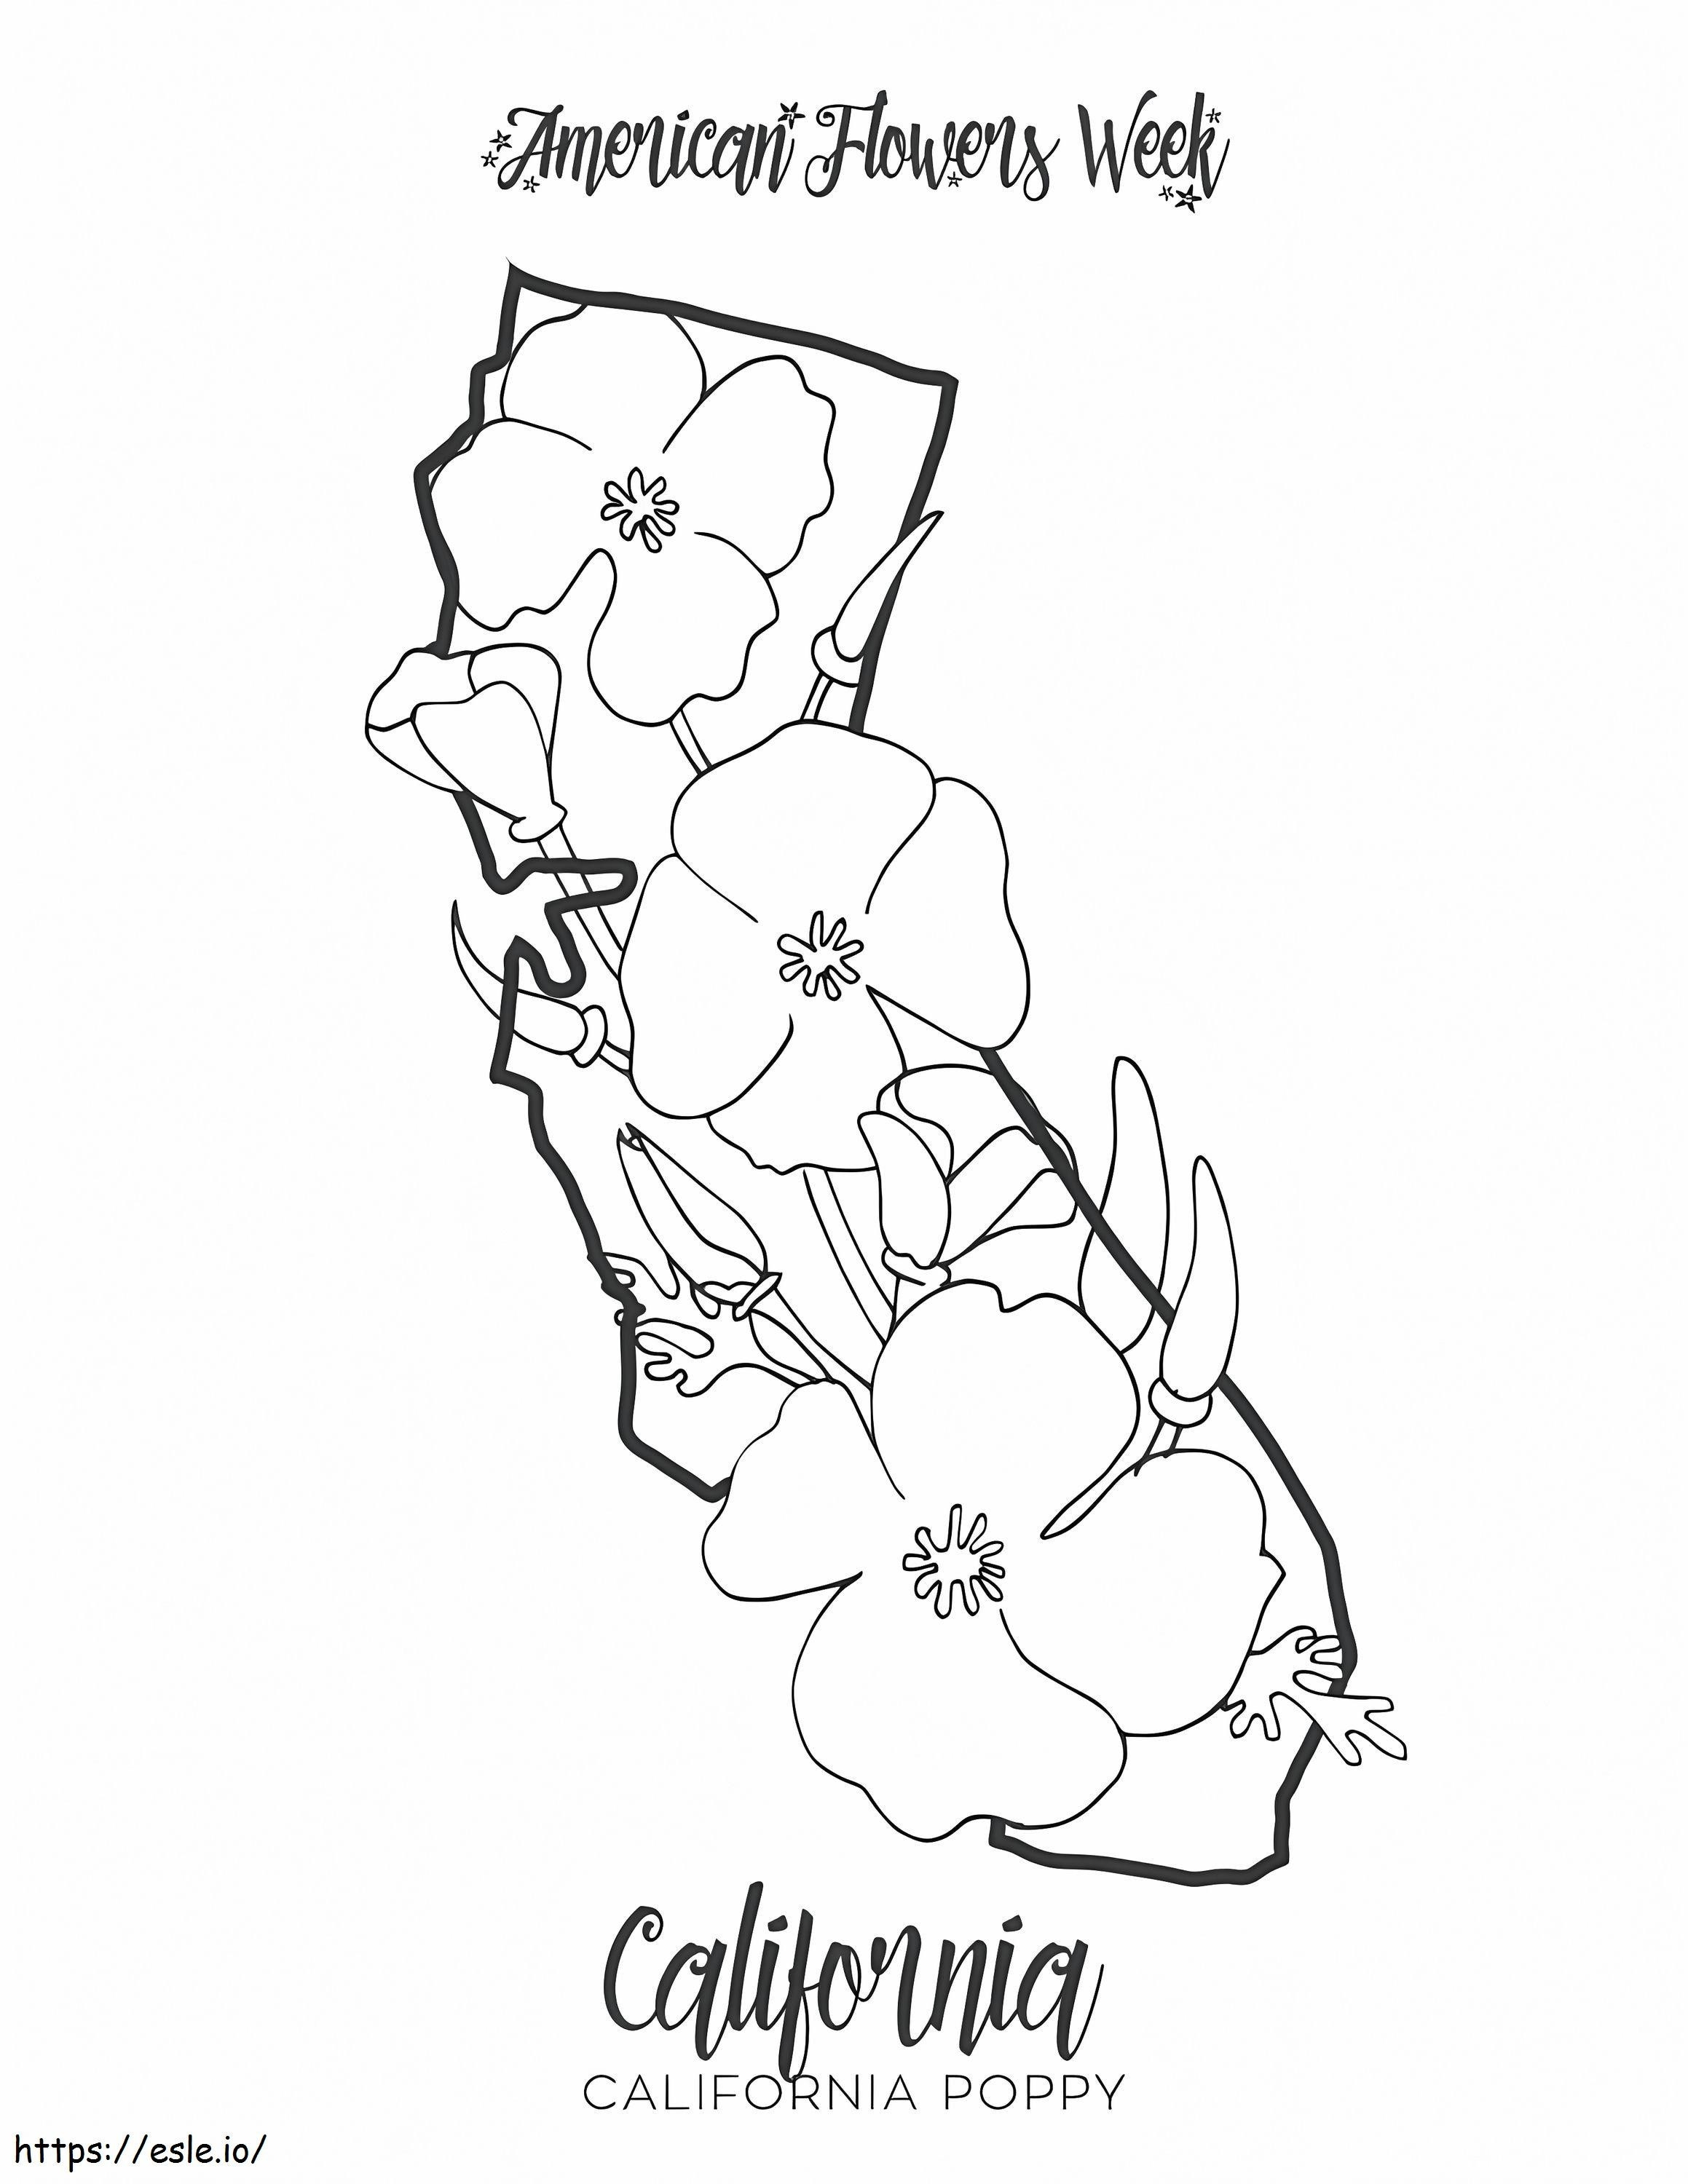 California Poppy State Flower coloring page